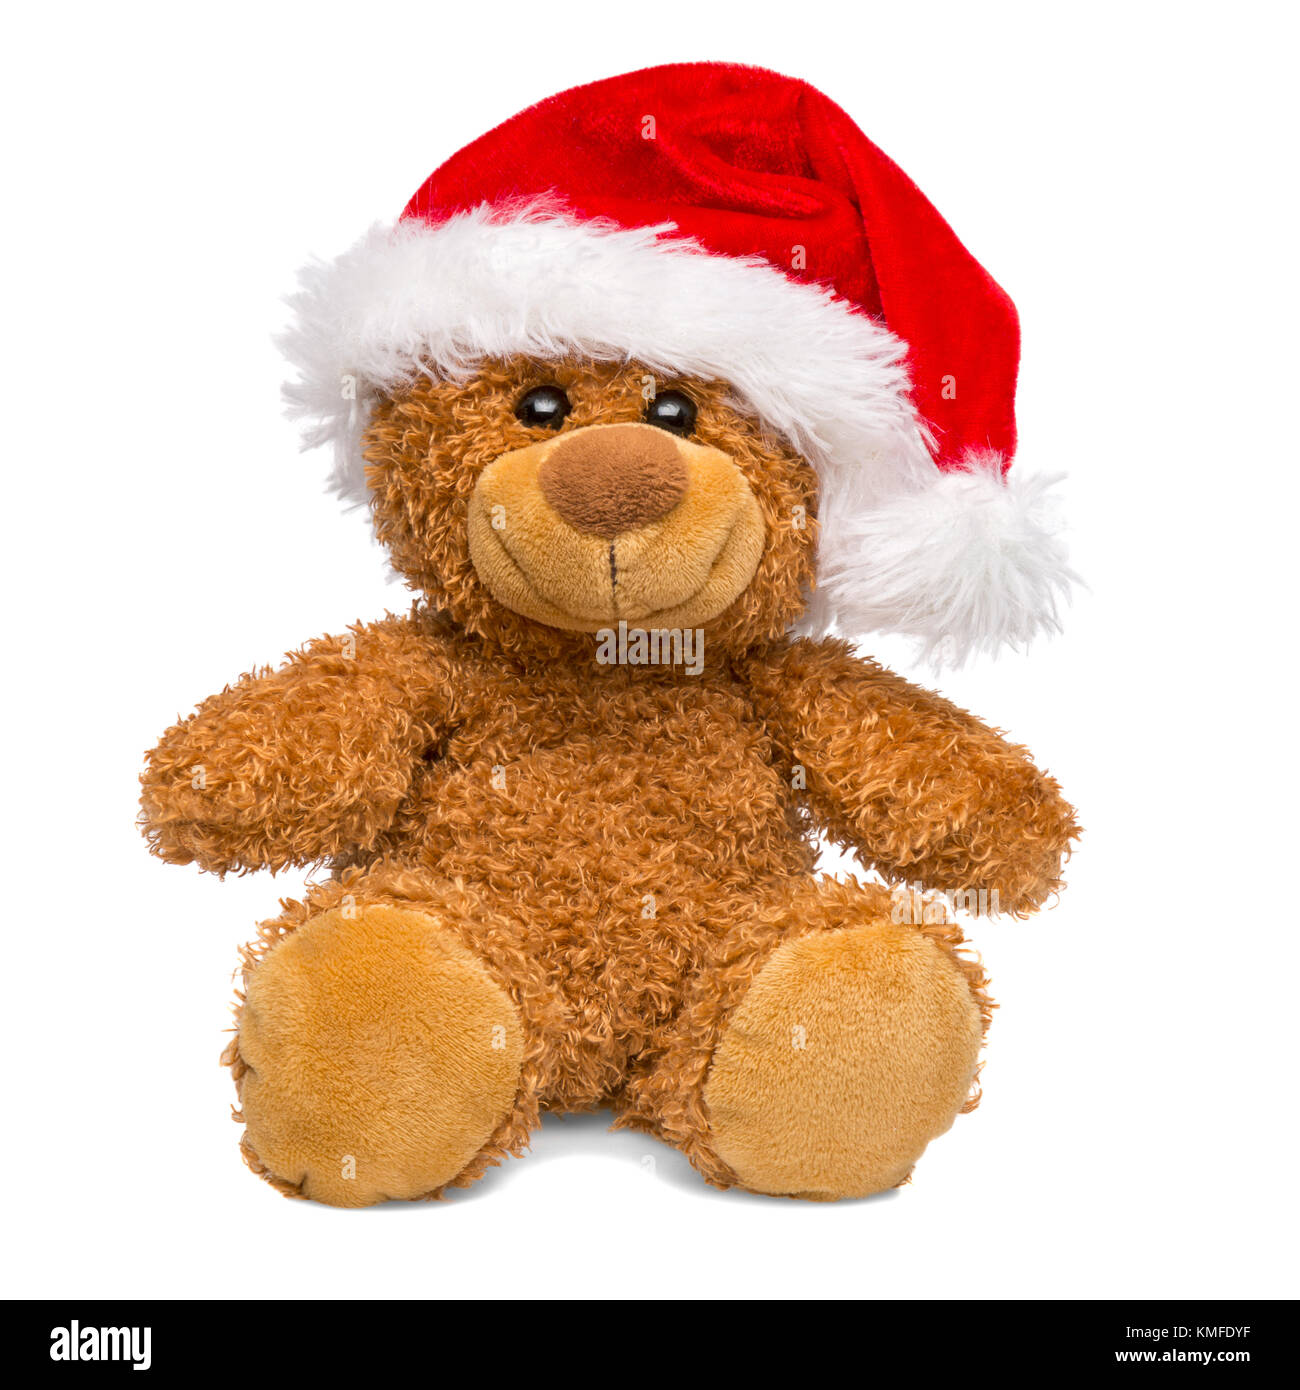 Christmas teddy bear wearing a Santa Claus hat isolated on white background, cut out. Stock Photo